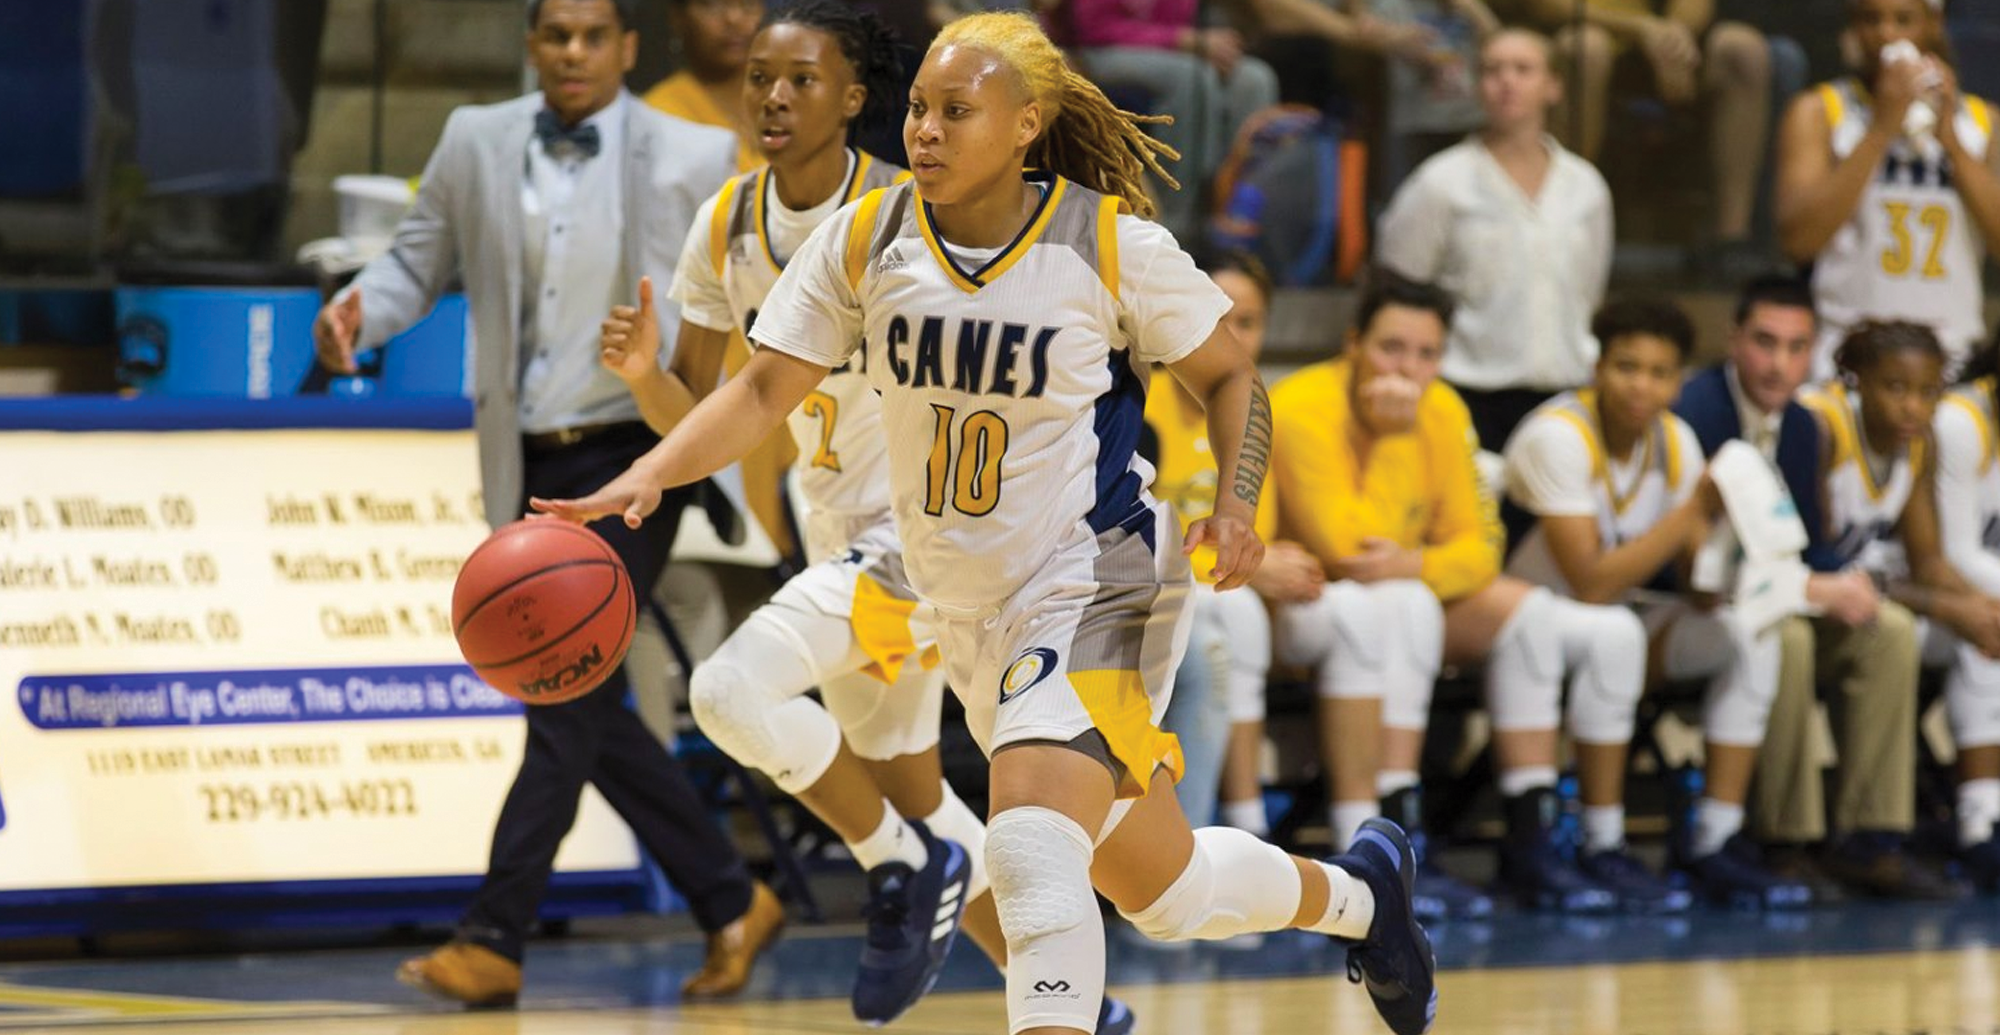 Strong Defense Lifts Lander Over GSW